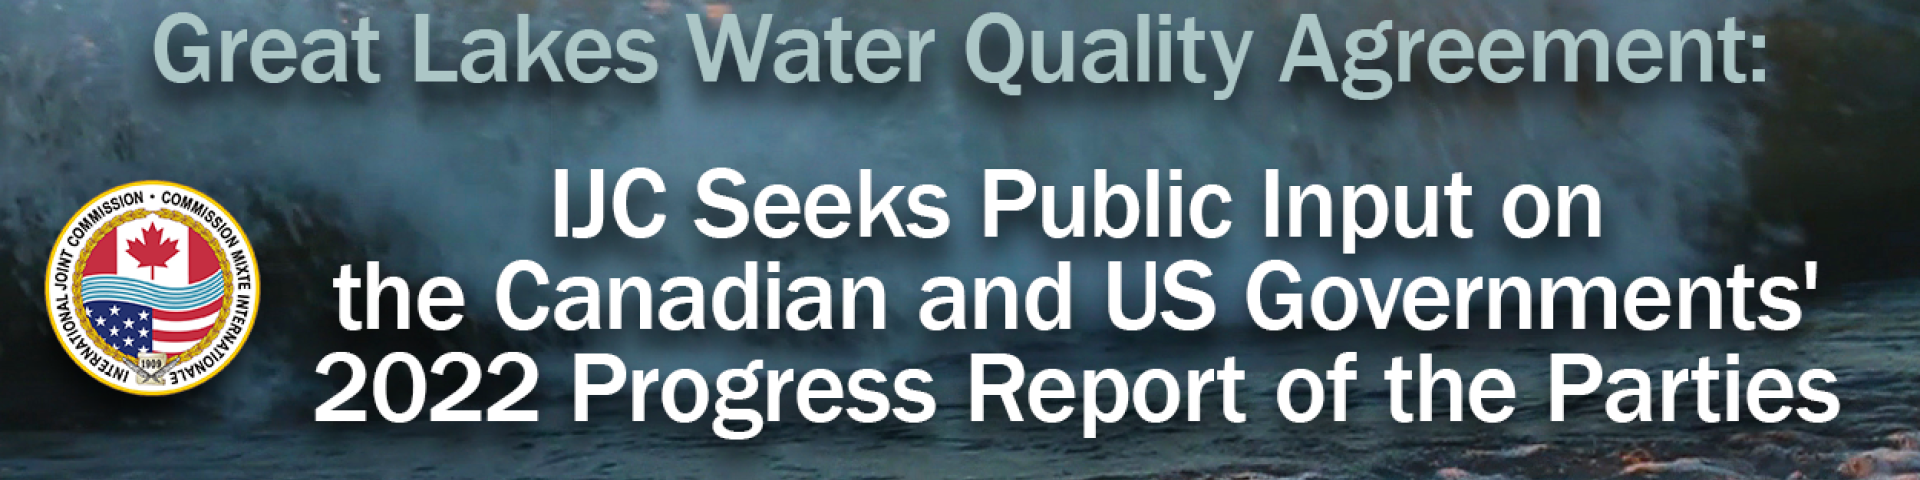 Text: Great Lakes Water Quality Agreement: IJC Seeks Public Input on the Canadian and US Governments' 2022 Progress Report of the Parties; Image: a blue wave of water on a beach